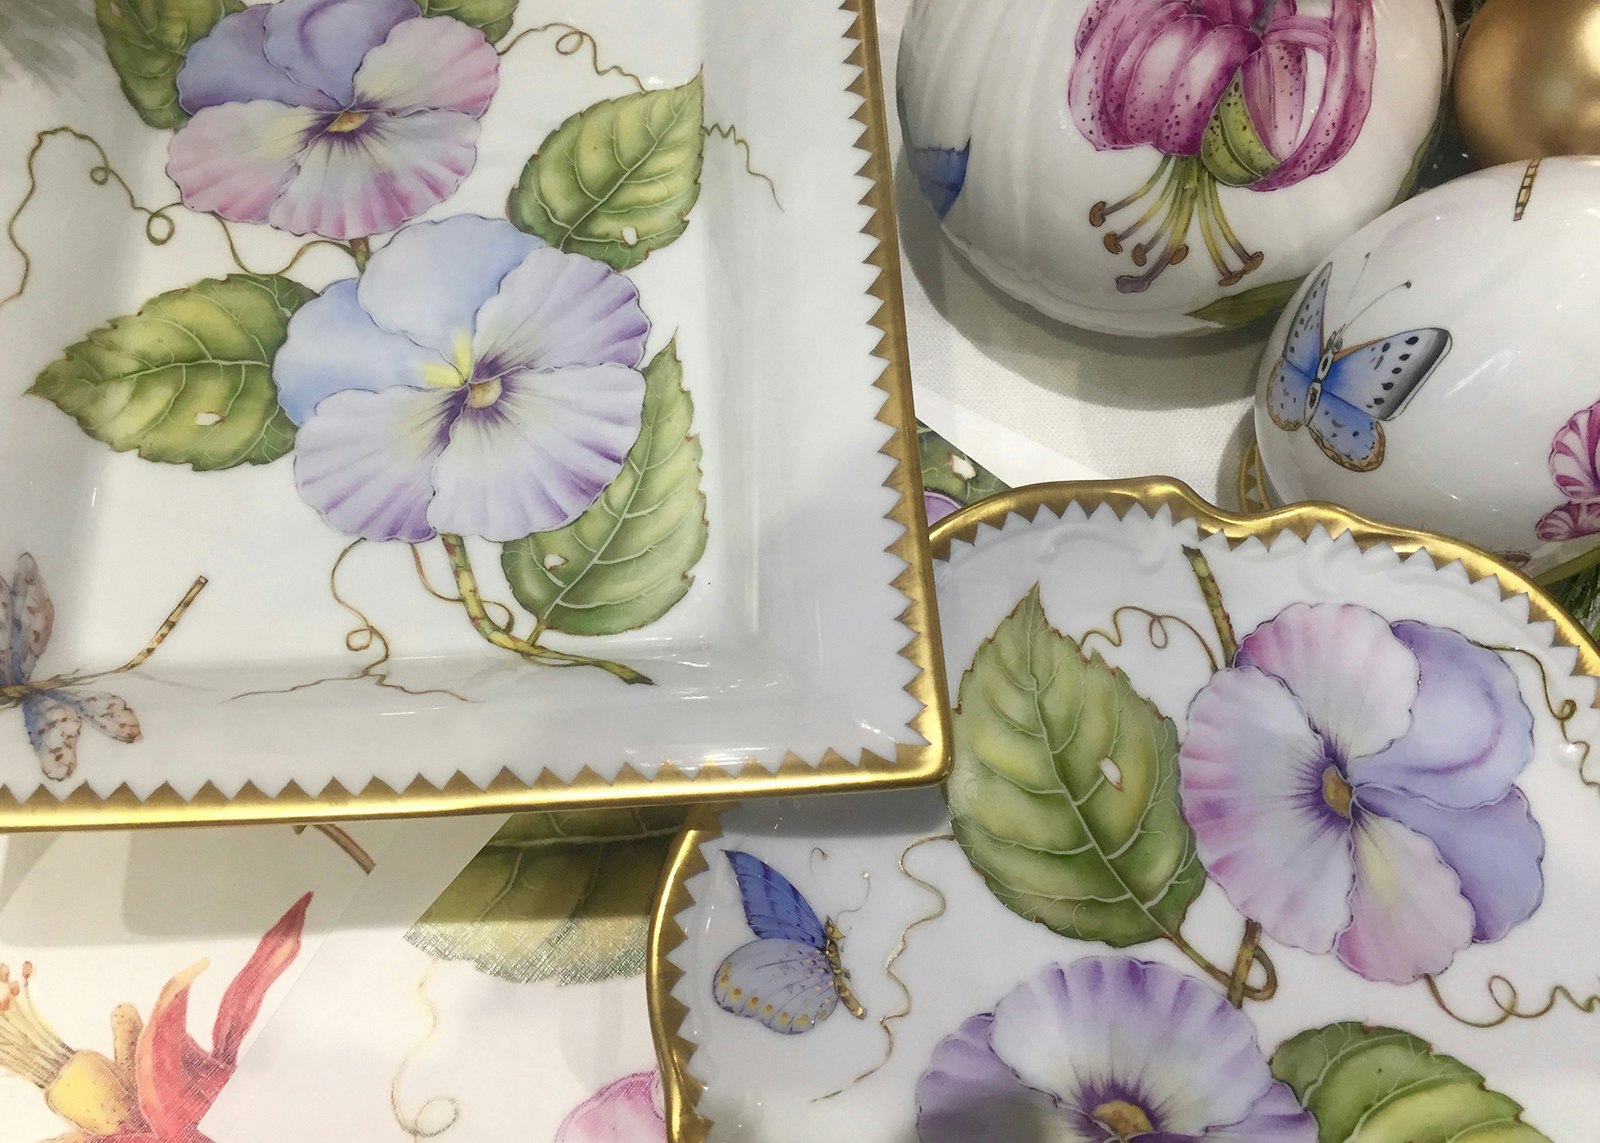 close-up of pansies on china dishes with gold edging